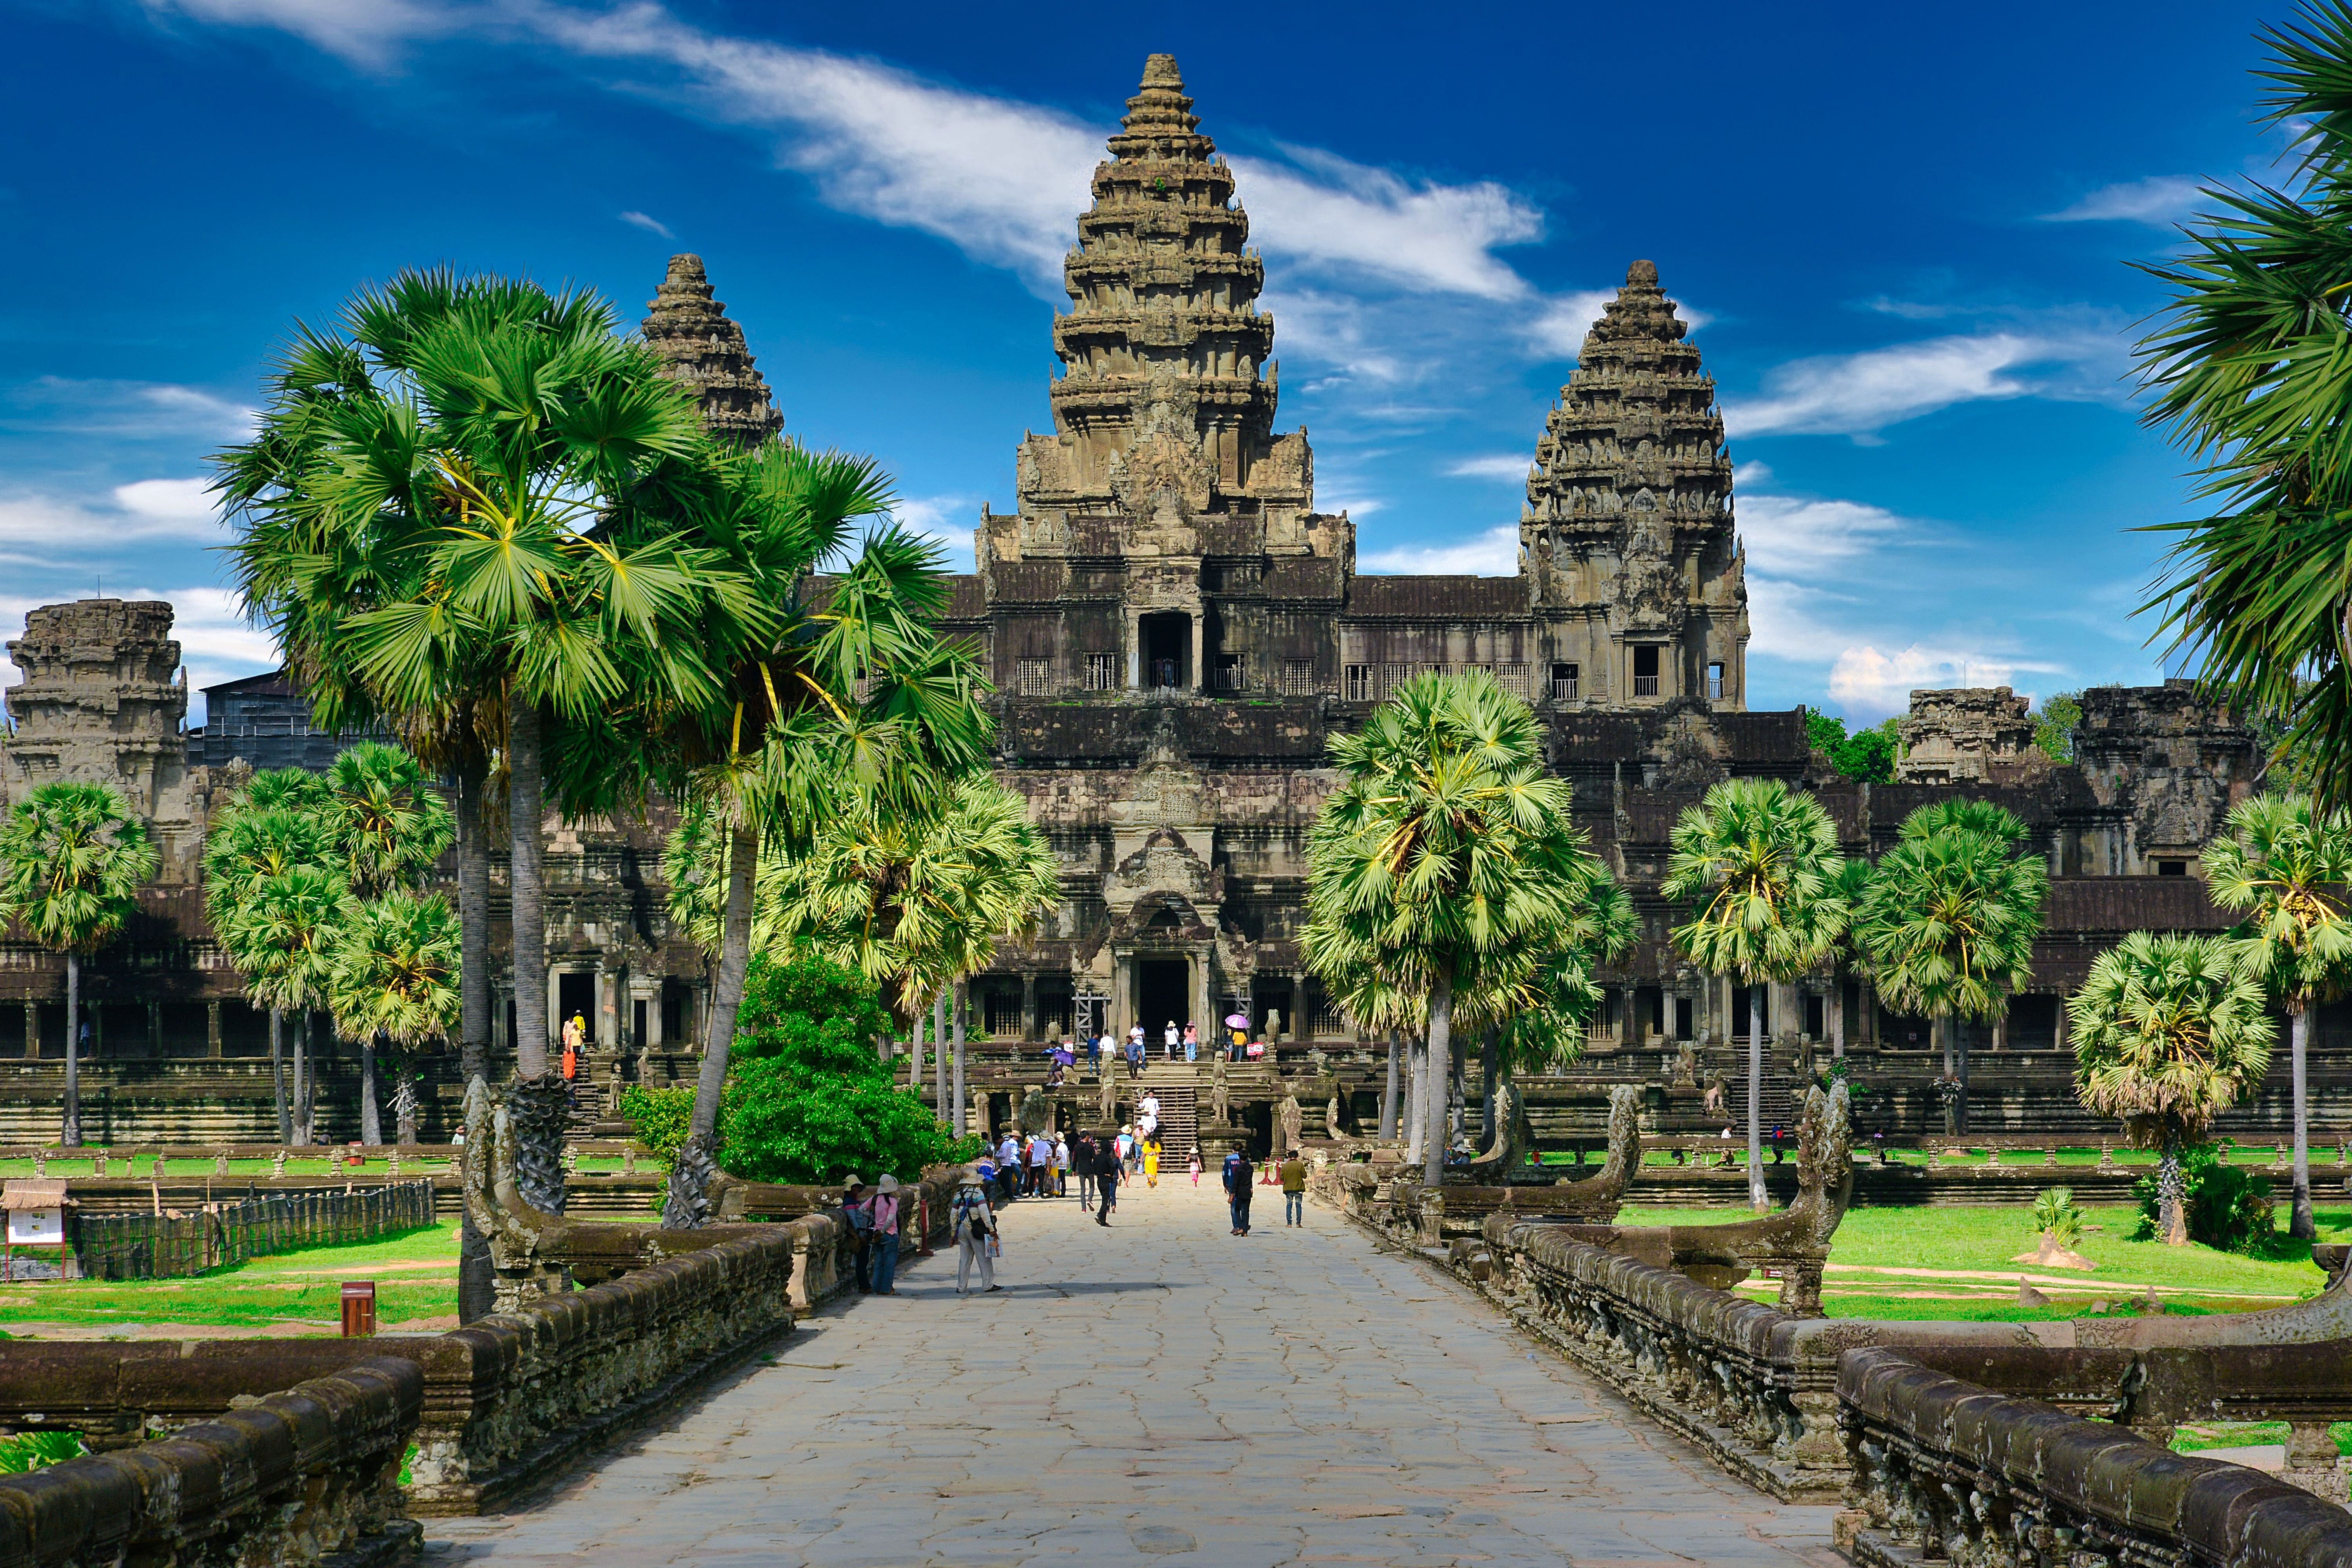 The famous Angkor Wat in Cambodia